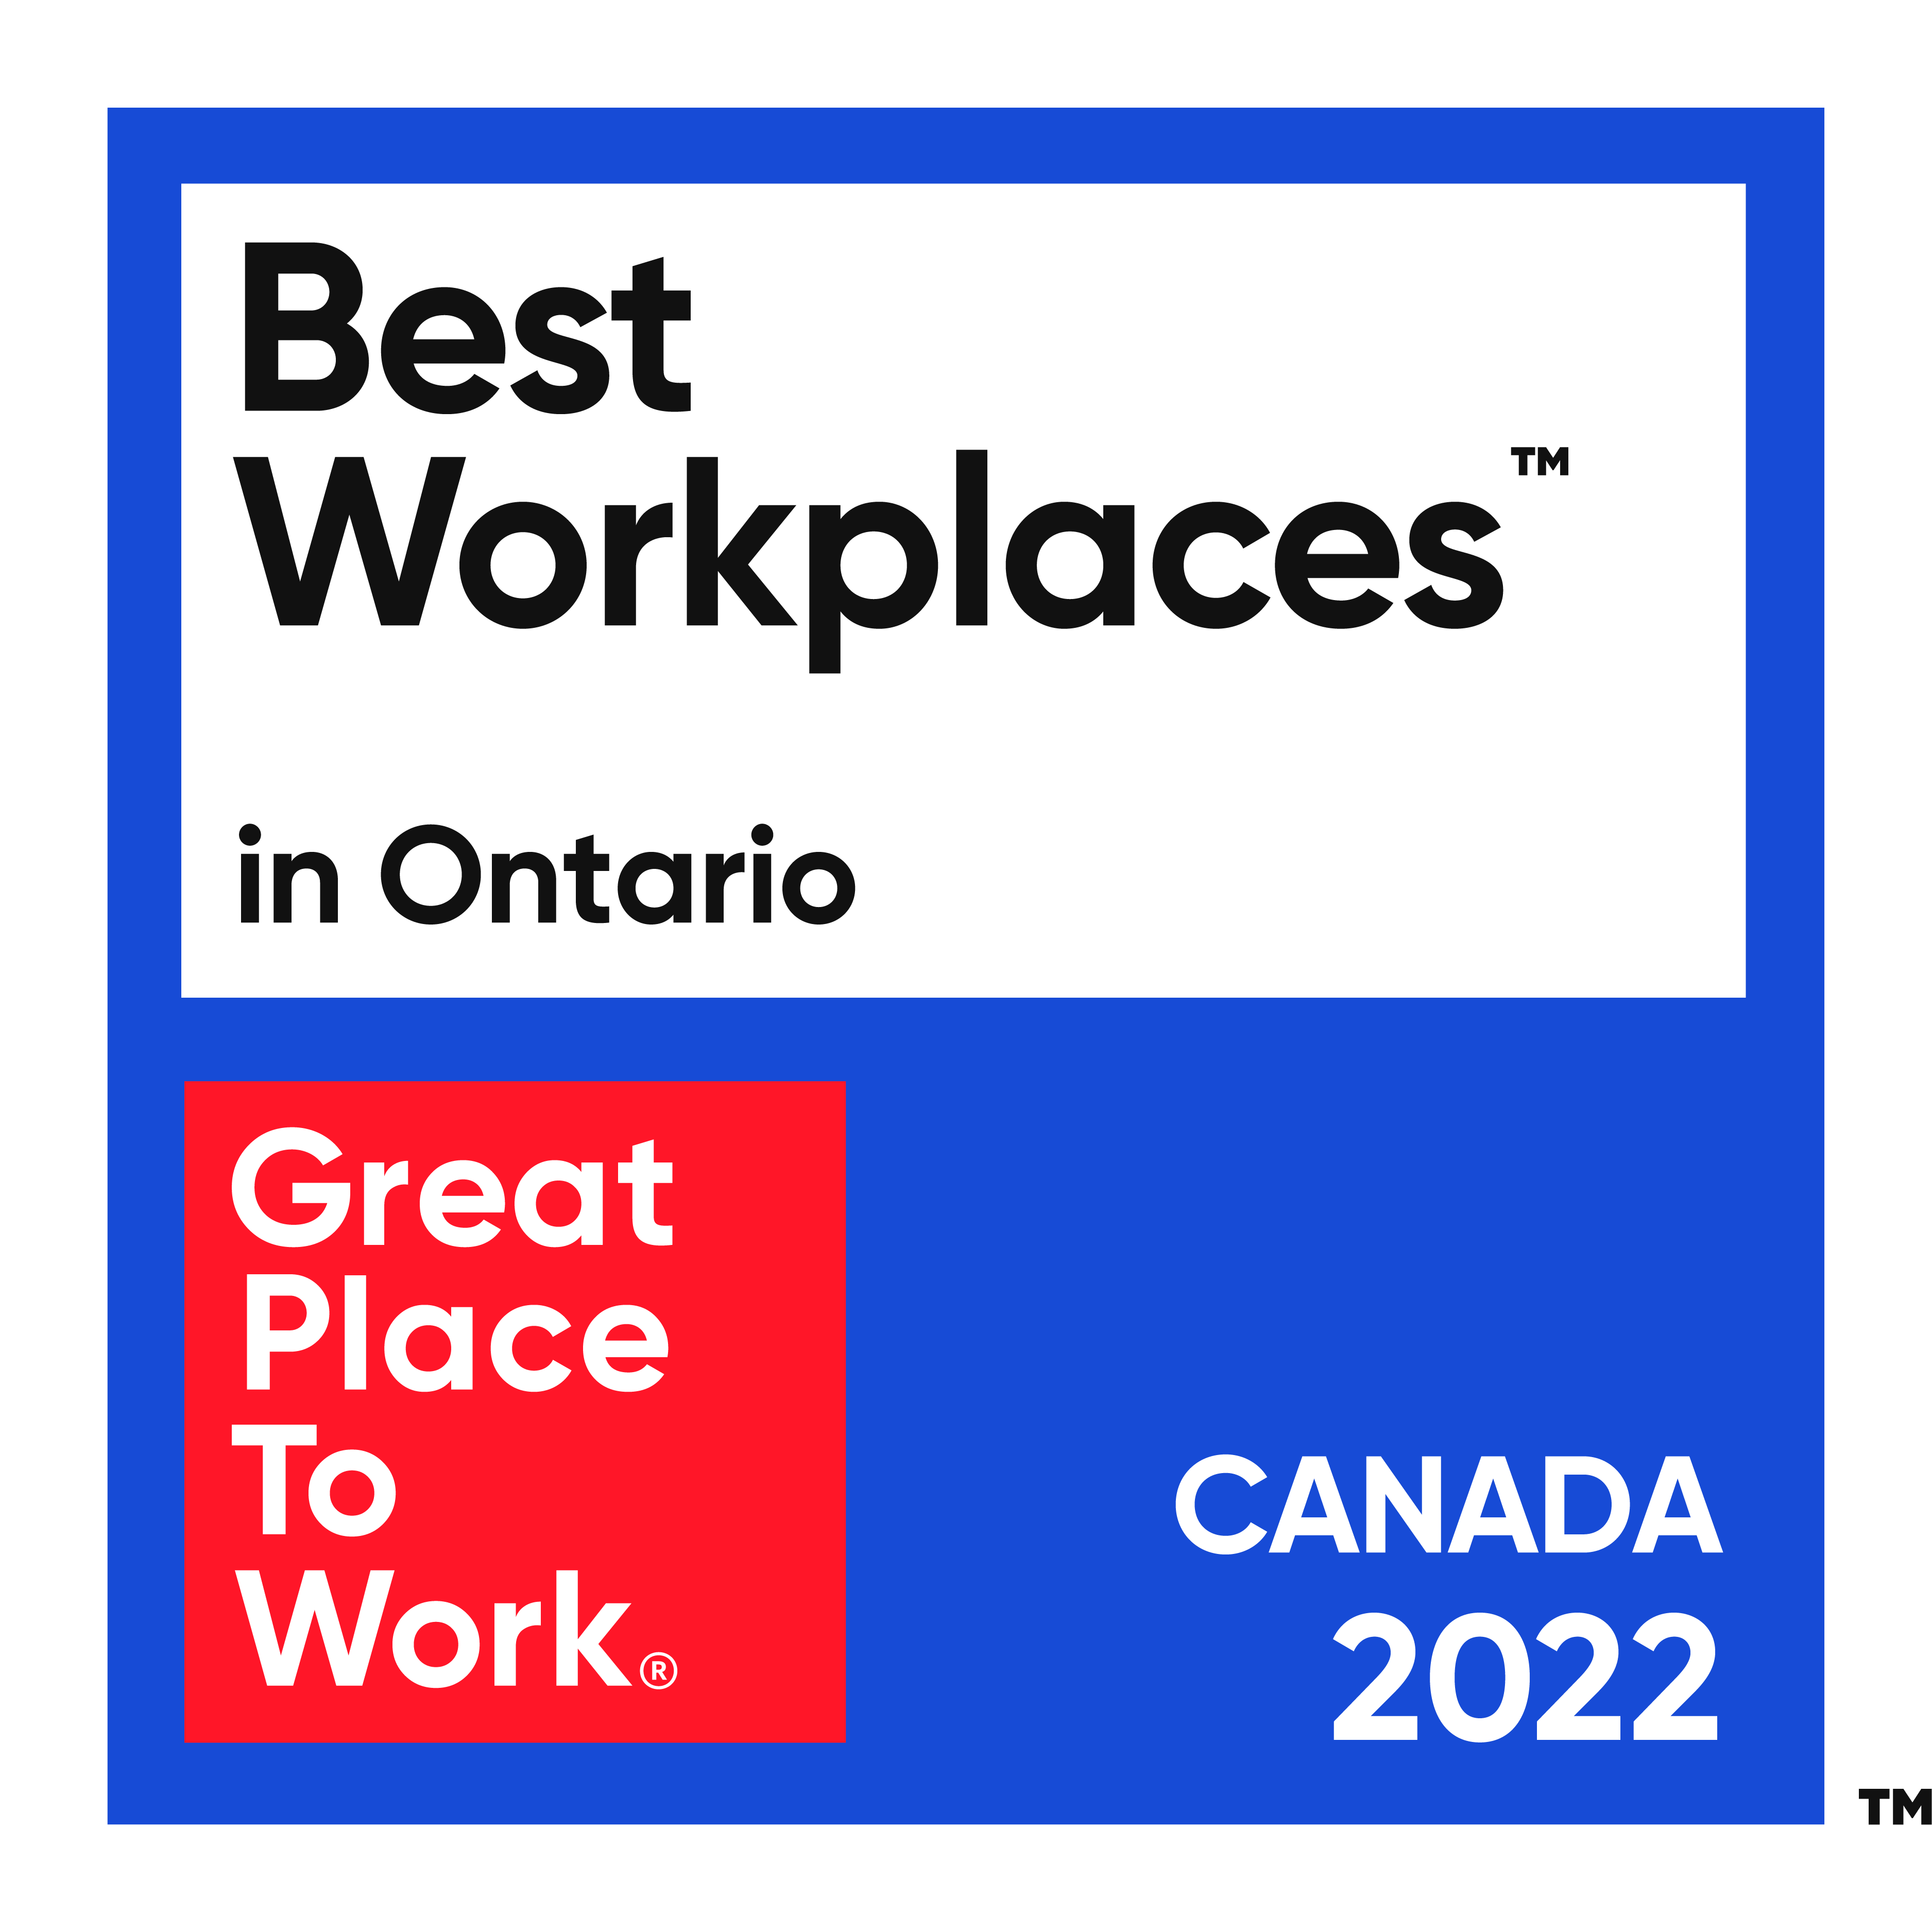 Best Workplaces in Ontario. Great Place to Work Canada 2022